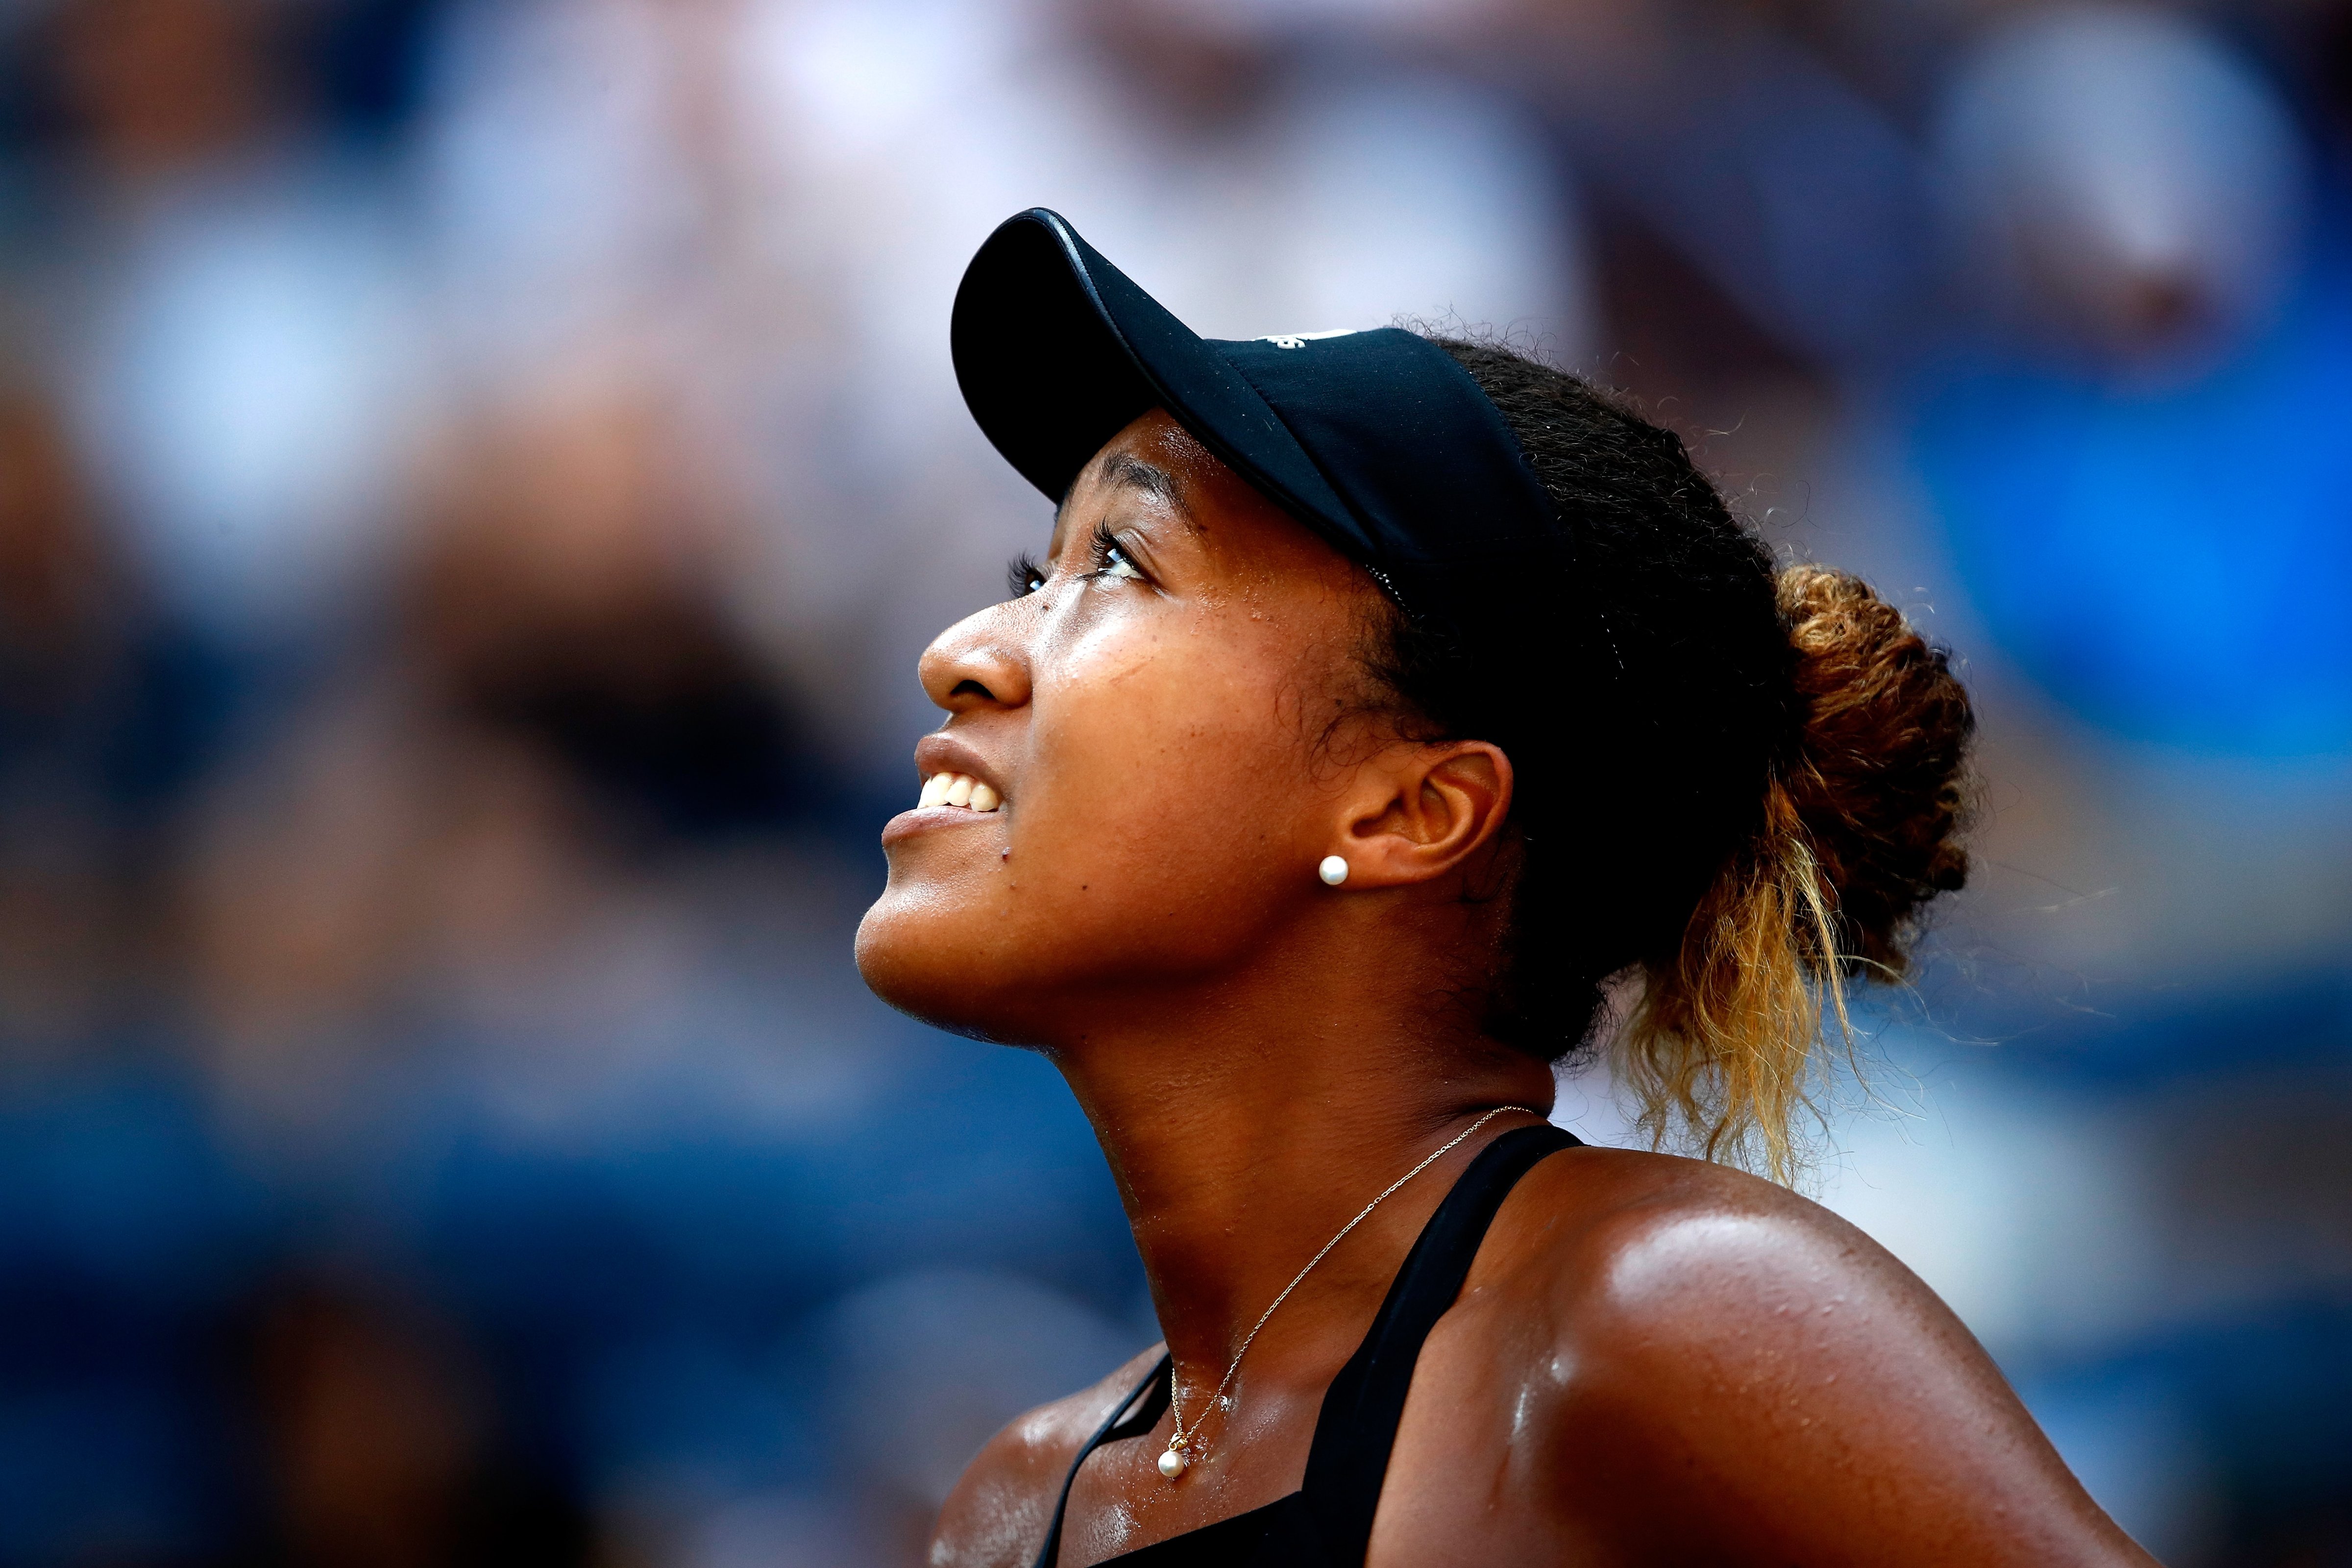 Naomi Osaka of Japan looks on during the women's singles fourth round match against Aryna Sabalenka of Belarus on Day Eight of the 2018 U.S. Open at the USTA Billie Jean King National Tennis Center on Sept. 3, 2018. (Julian Finney—Getty Images)